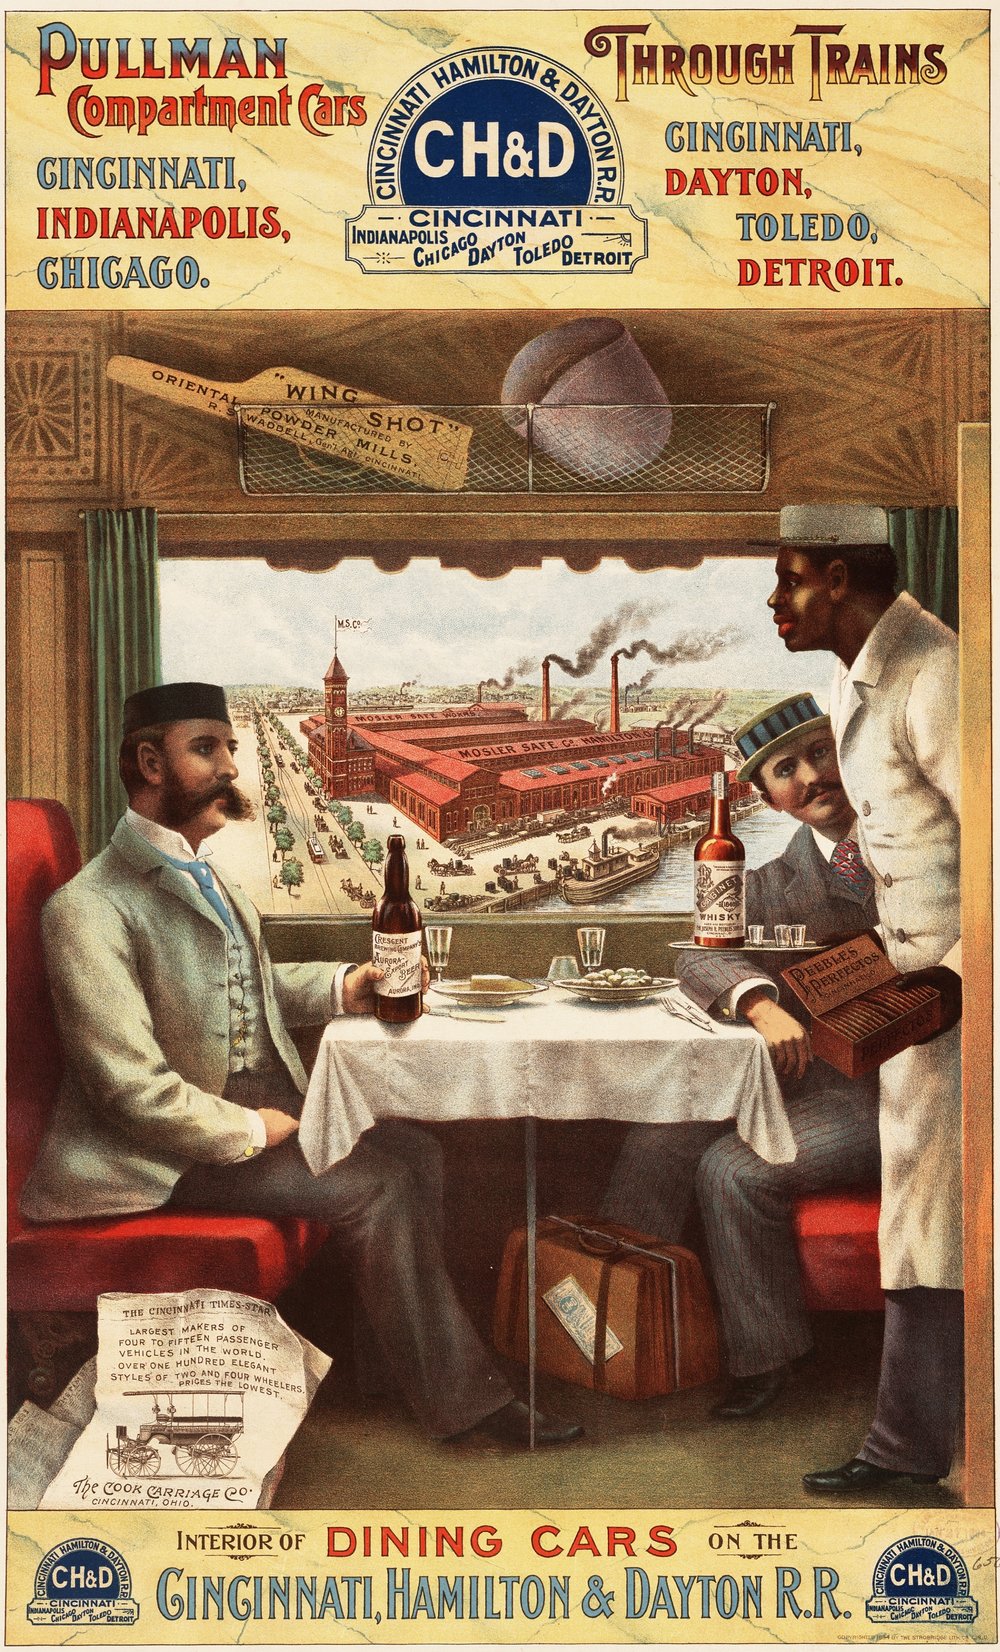   Pullman advertising poster, 1894. The African American Pullman railroad porters relied solely on tips to make a living.&nbsp;   Source  